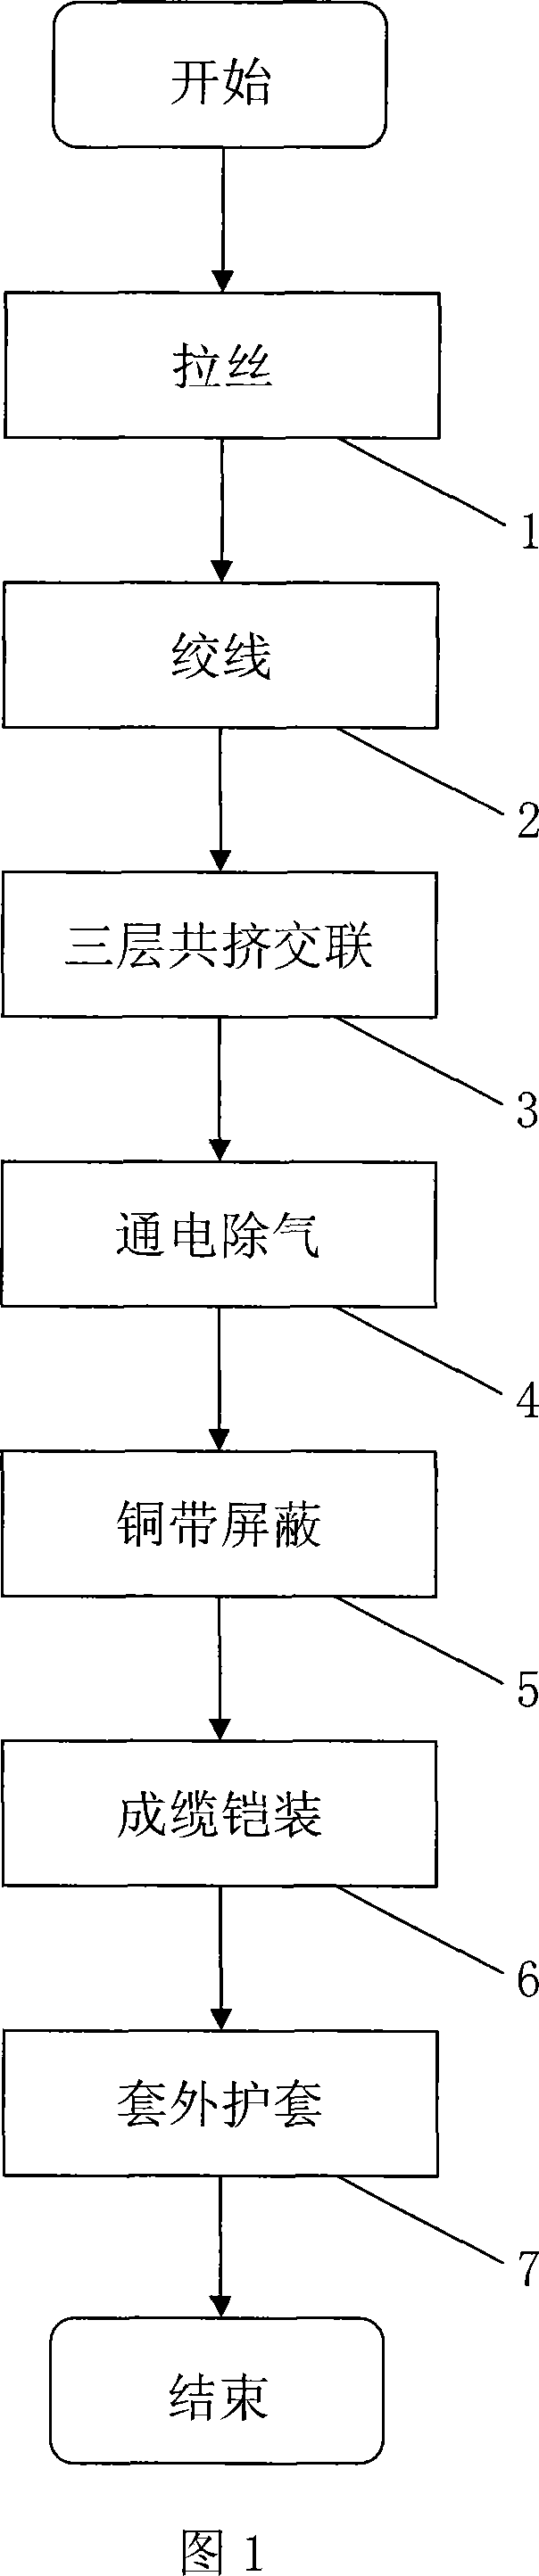 Processing method of power cable